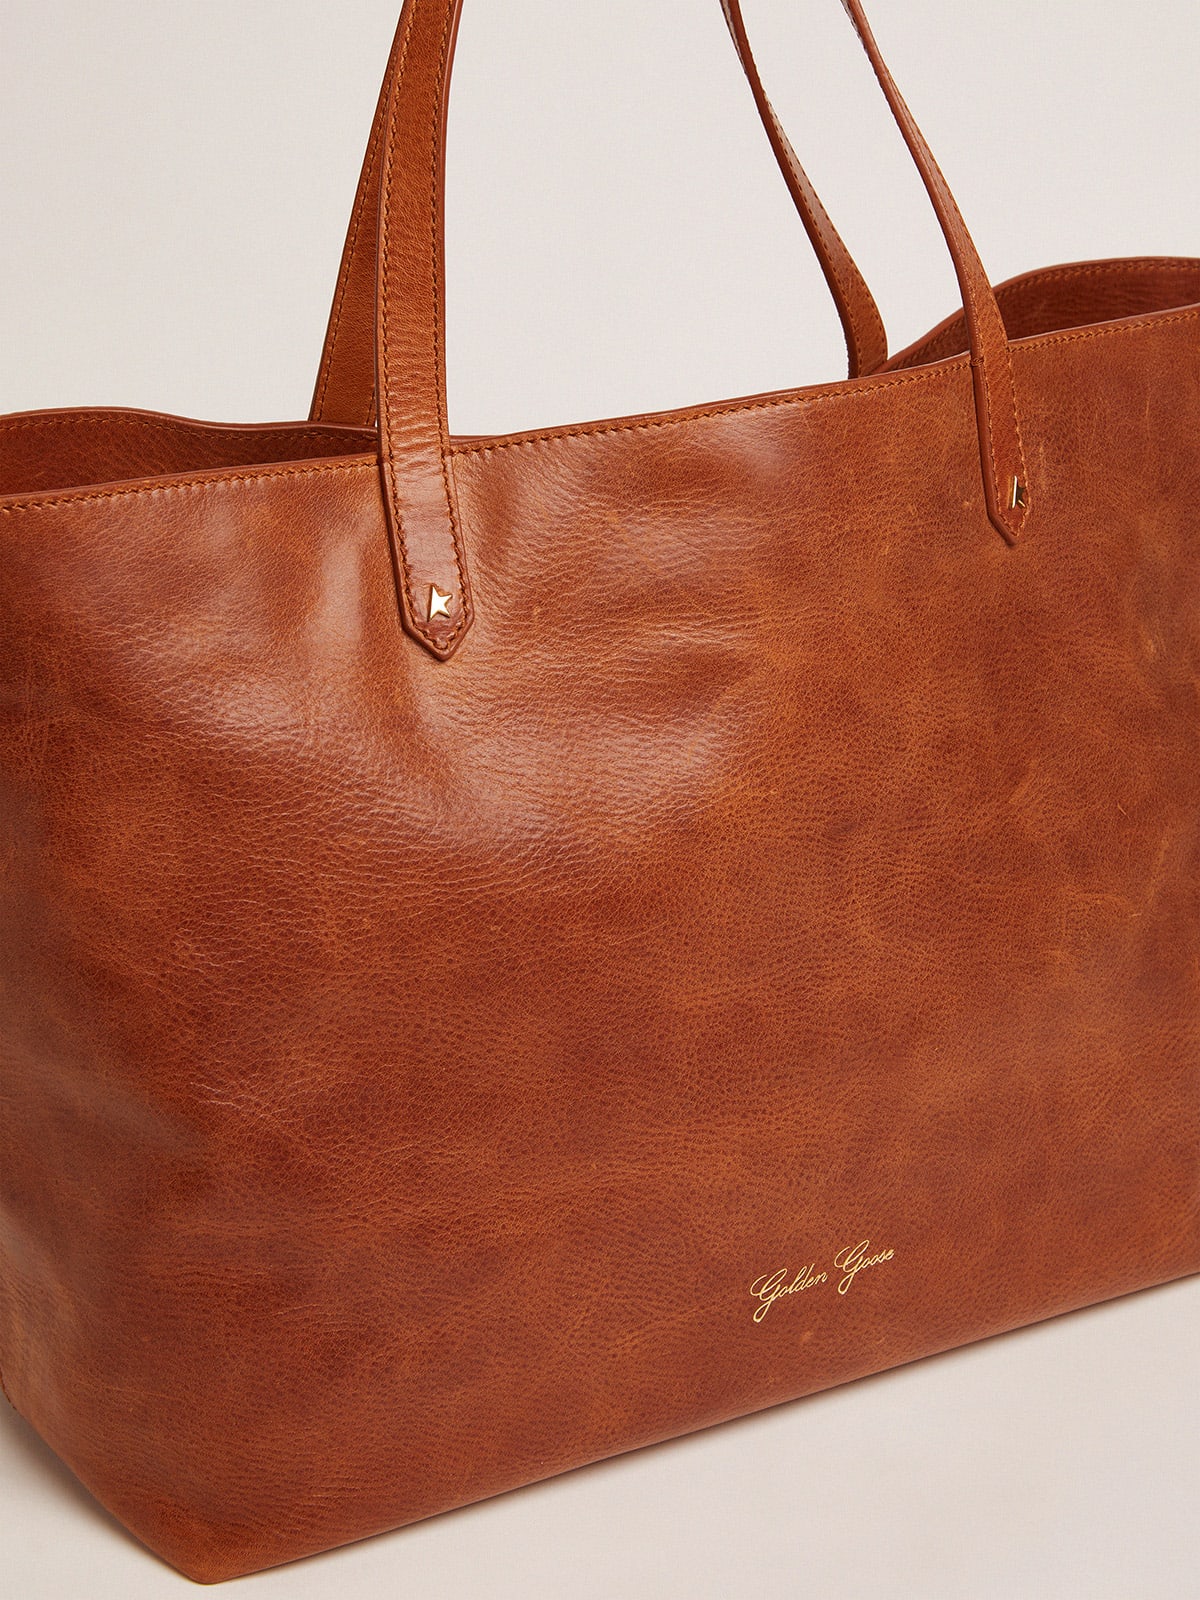 Golden Goose - Tan-colored Pasadena Bag with gold logo on the front in 